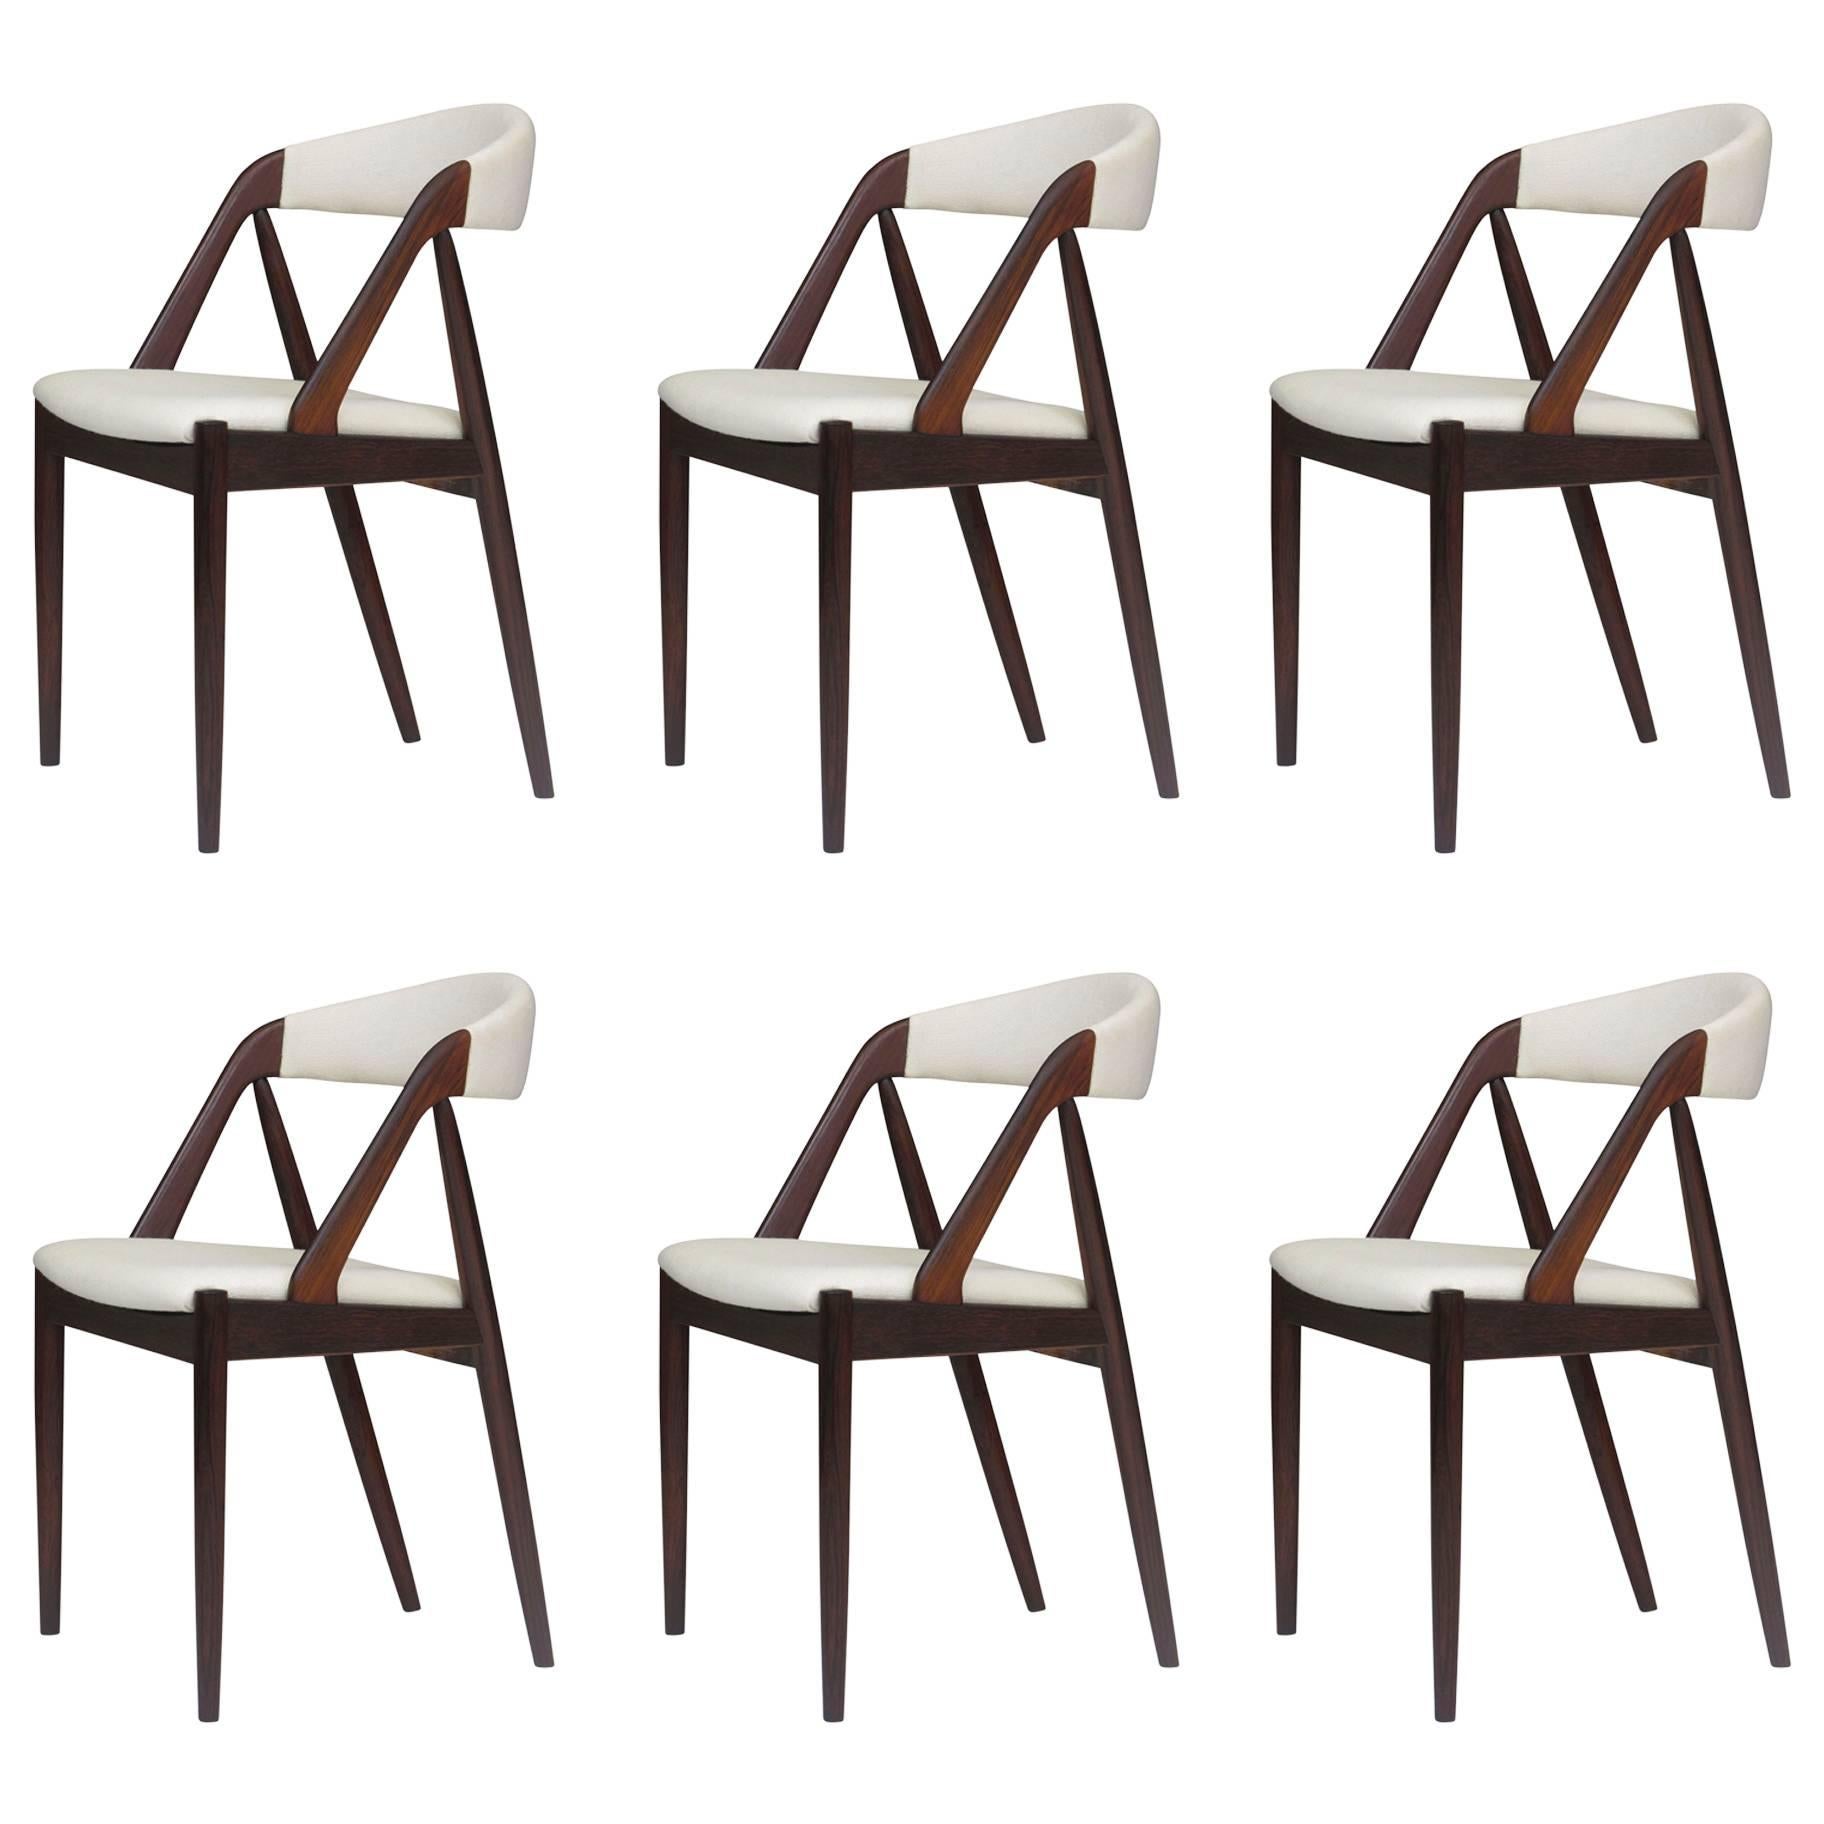 Kai Kristiansen Danish Rosewood Curved Back Dining Chairs in White 